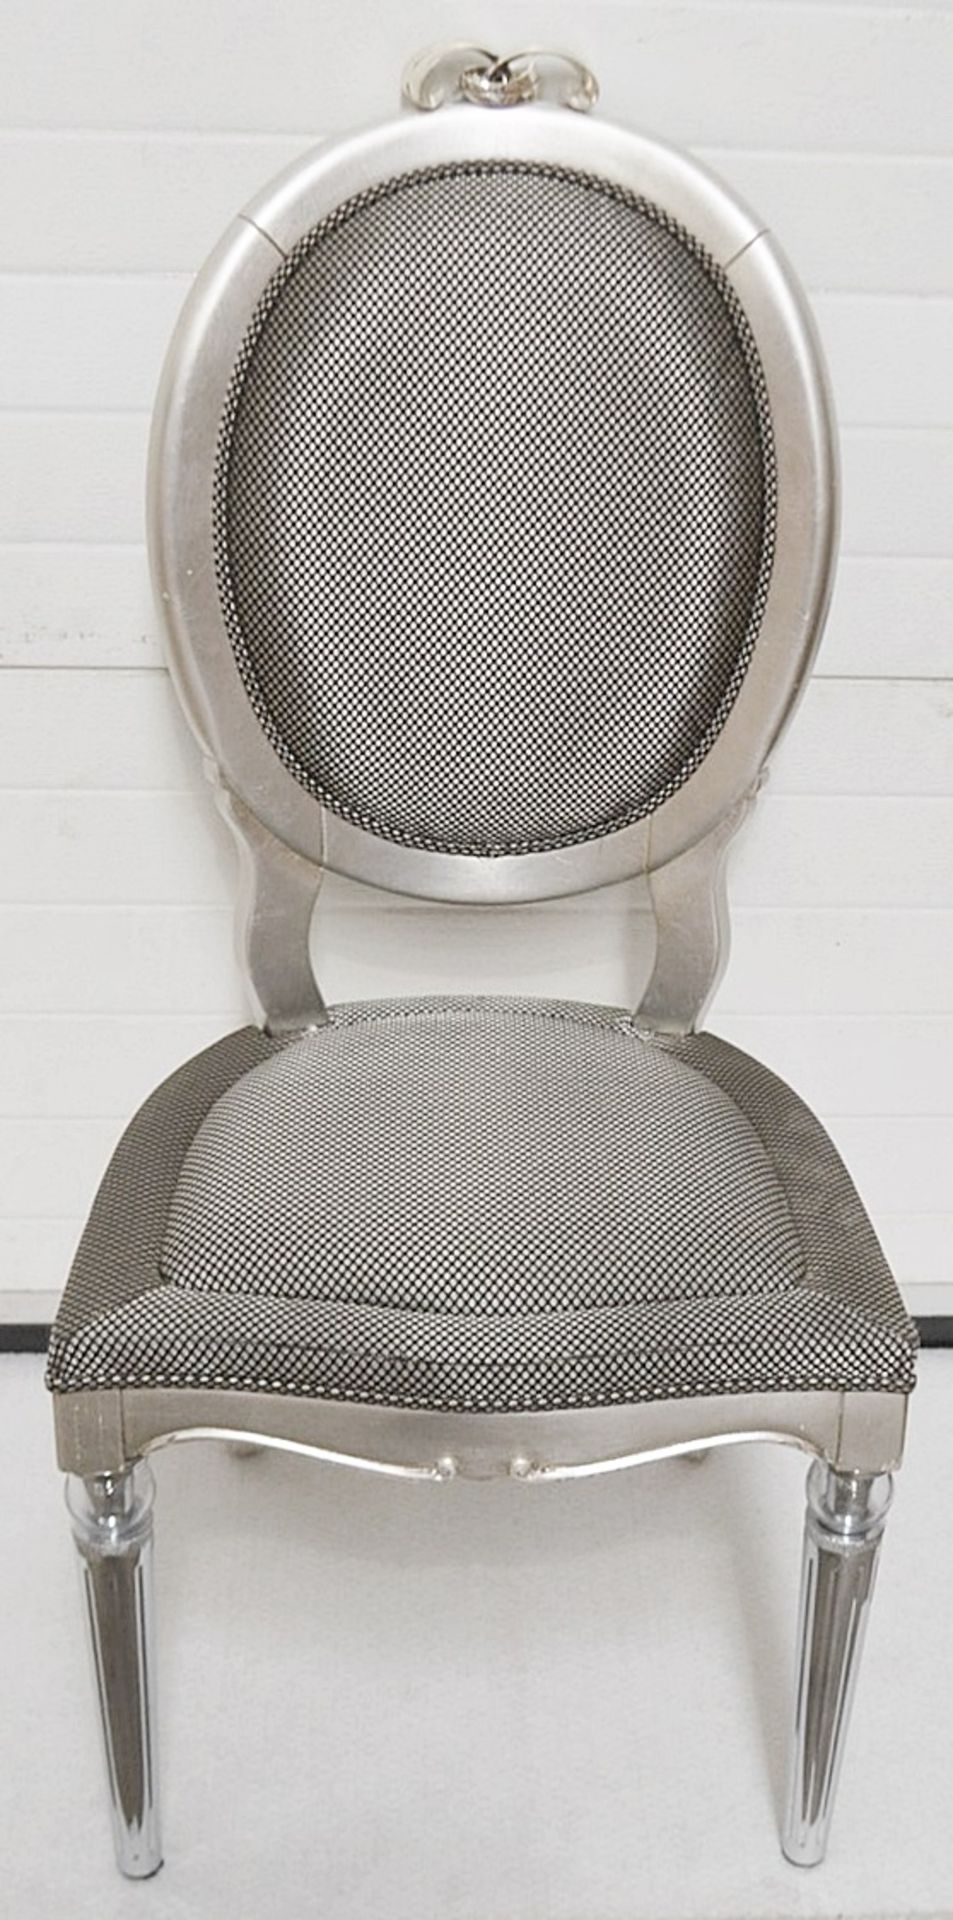 1 x Luxurious Designer Chair In Silver With Upholstered Seat And Ornate Legs - Dimensions: H72 x